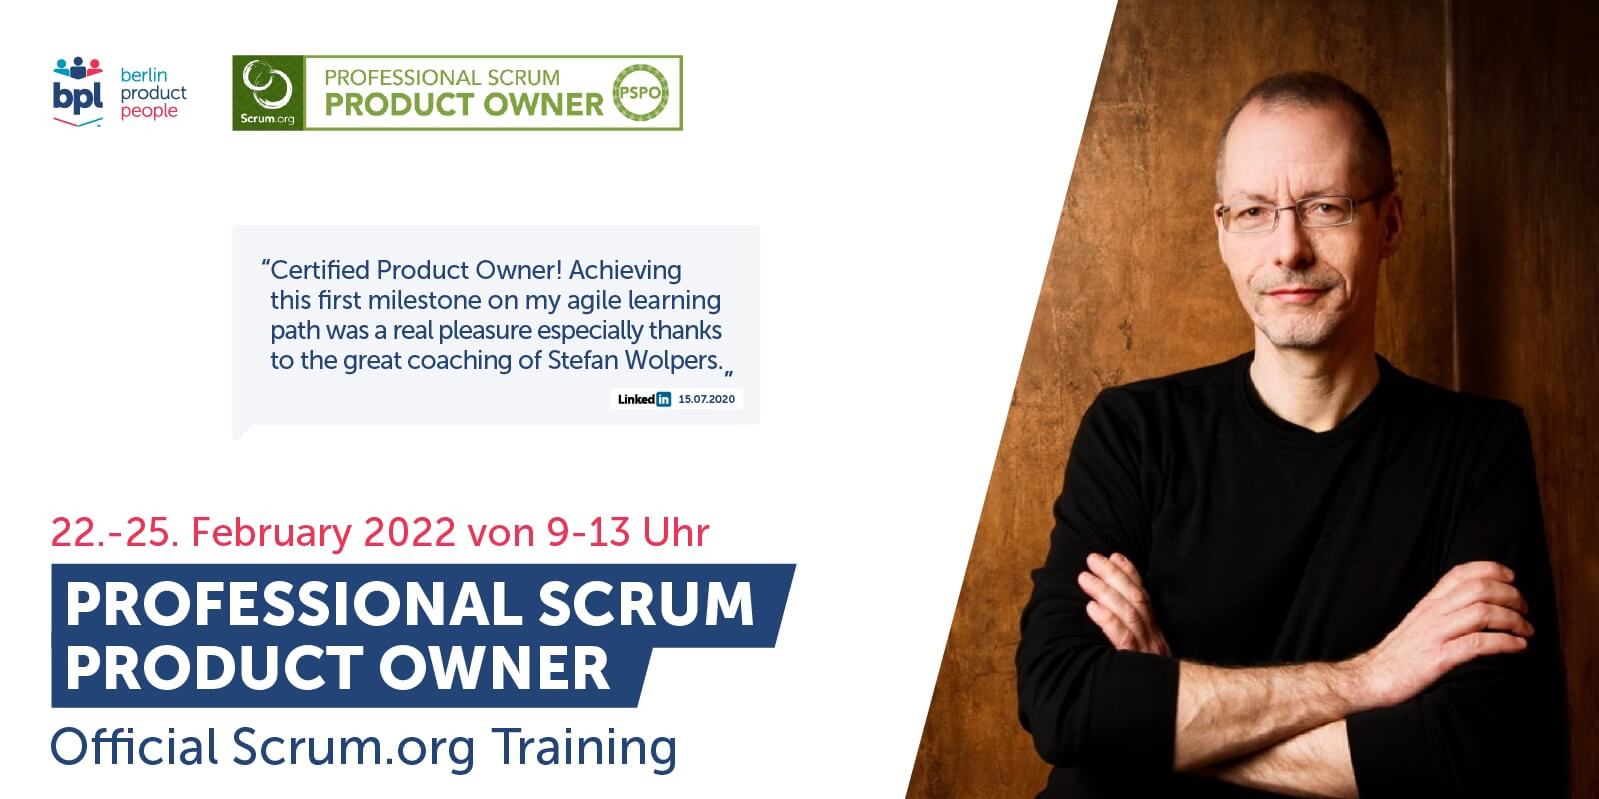 Virtuelle Professional Scrum Product Owner Schulung mit PSPO Zertifikat — Februar 2022 — Berlin Product People GmbH